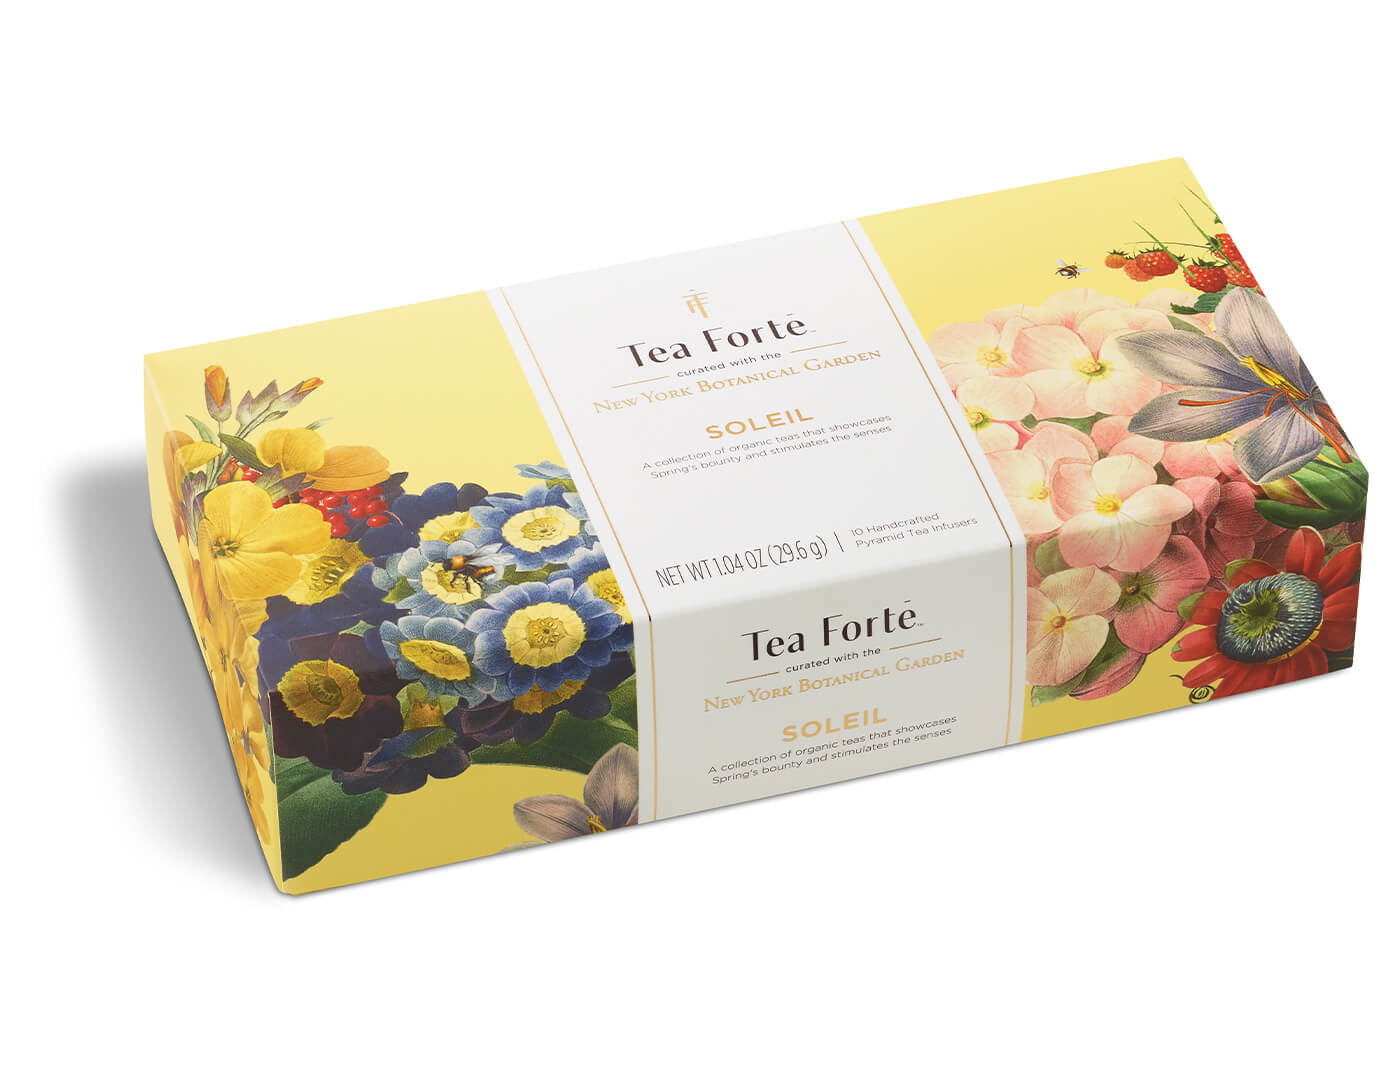 Soleil tea assortment in a 10 count petite presentation box with lid closed